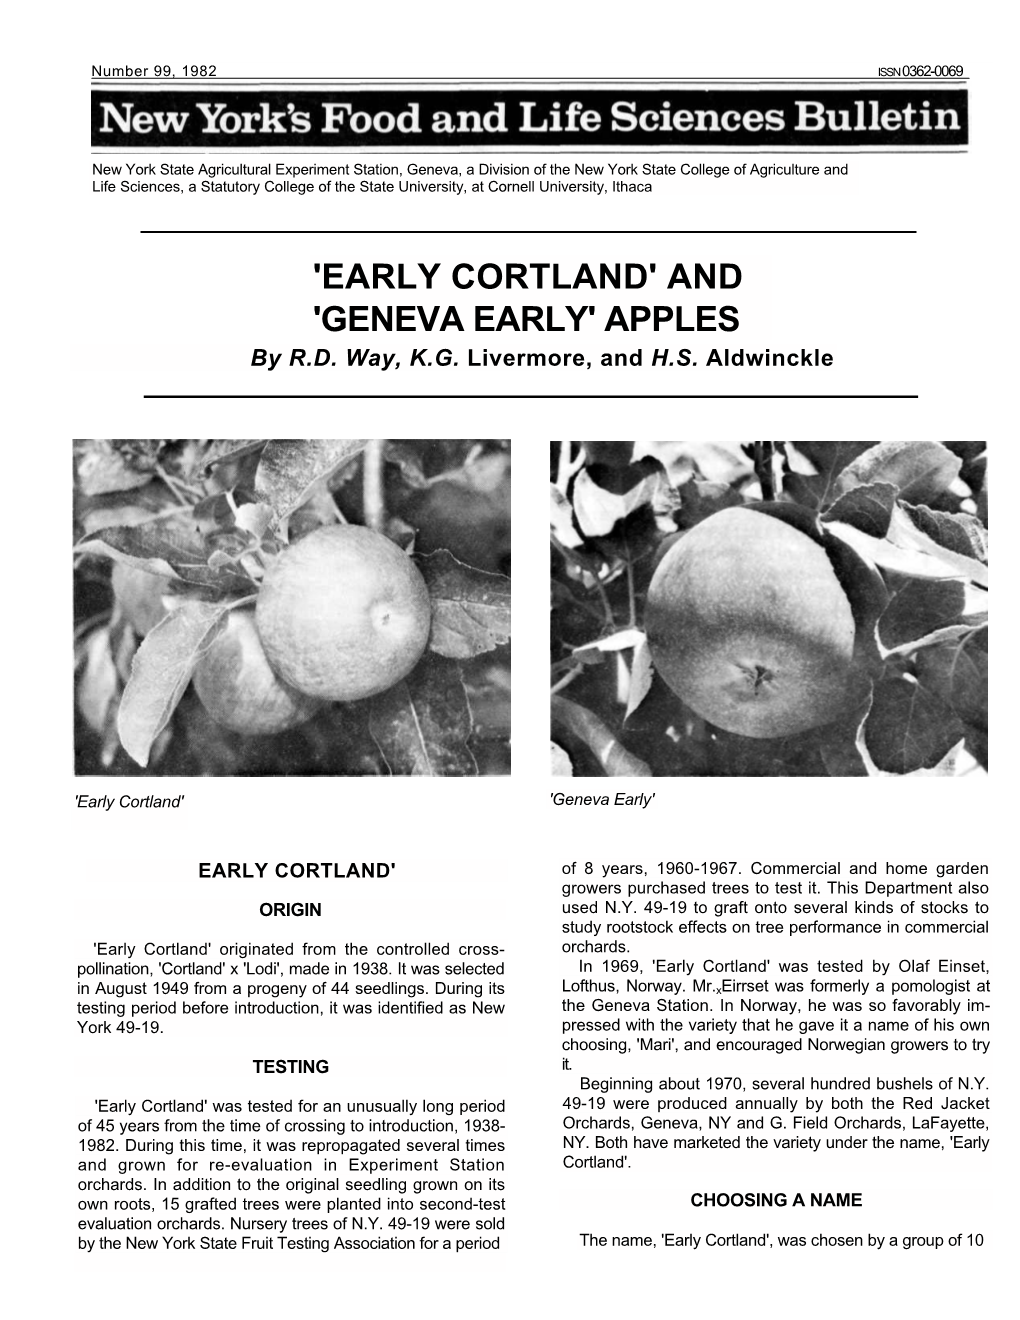 'Early Cortland' and 'Geneva Early' Apples